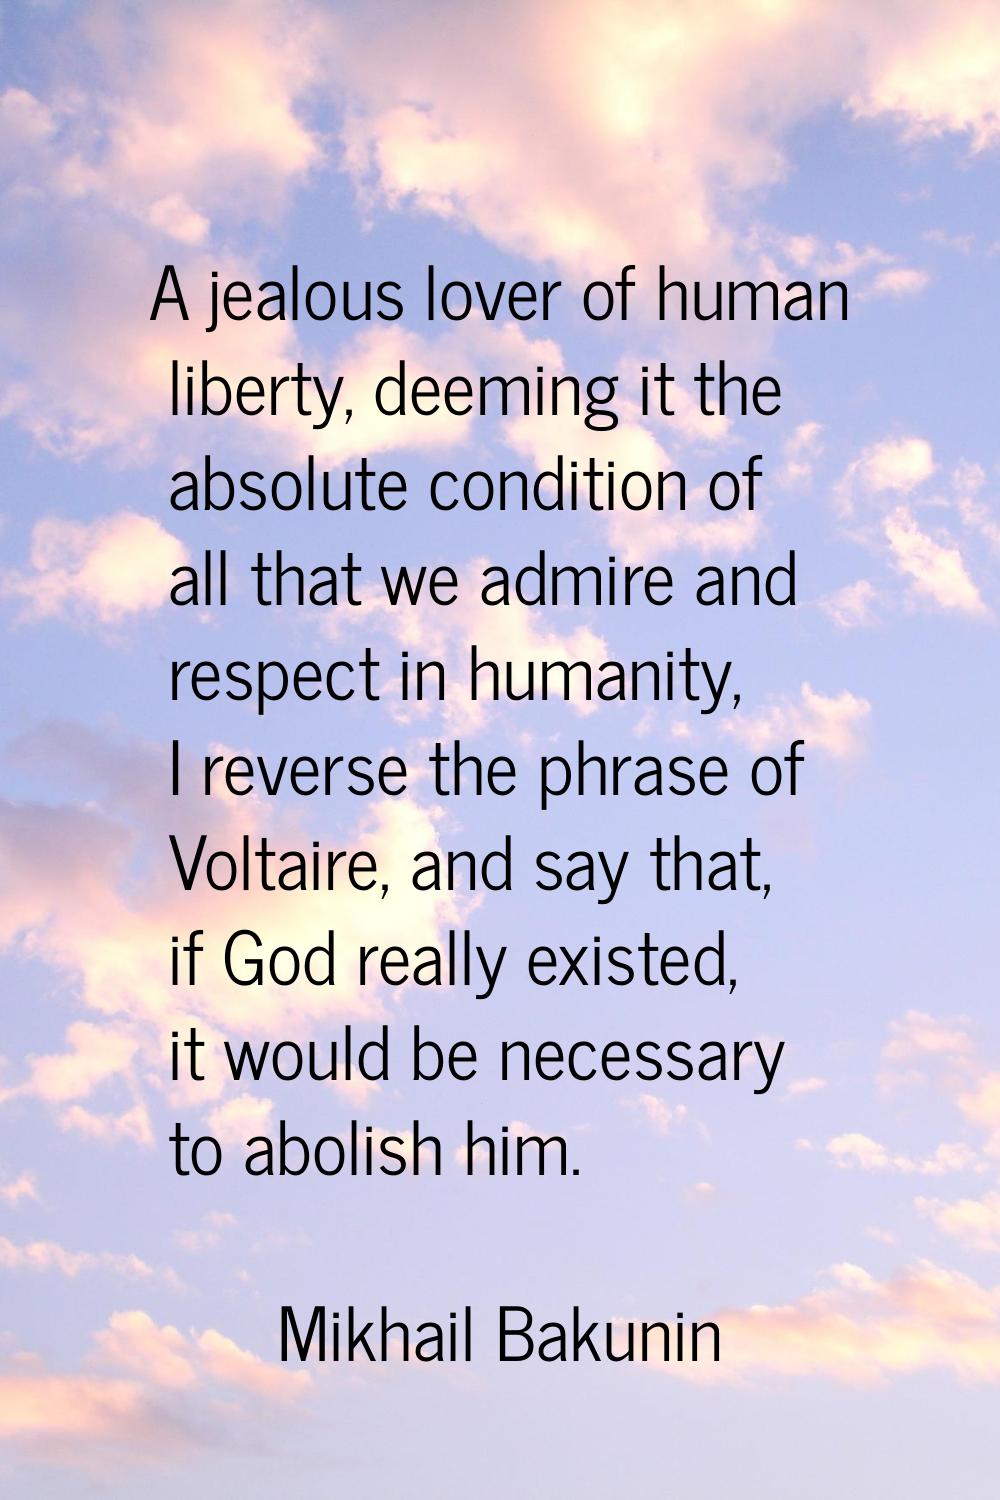 A jealous lover of human liberty, deeming it the absolute condition of all that we admire and respe